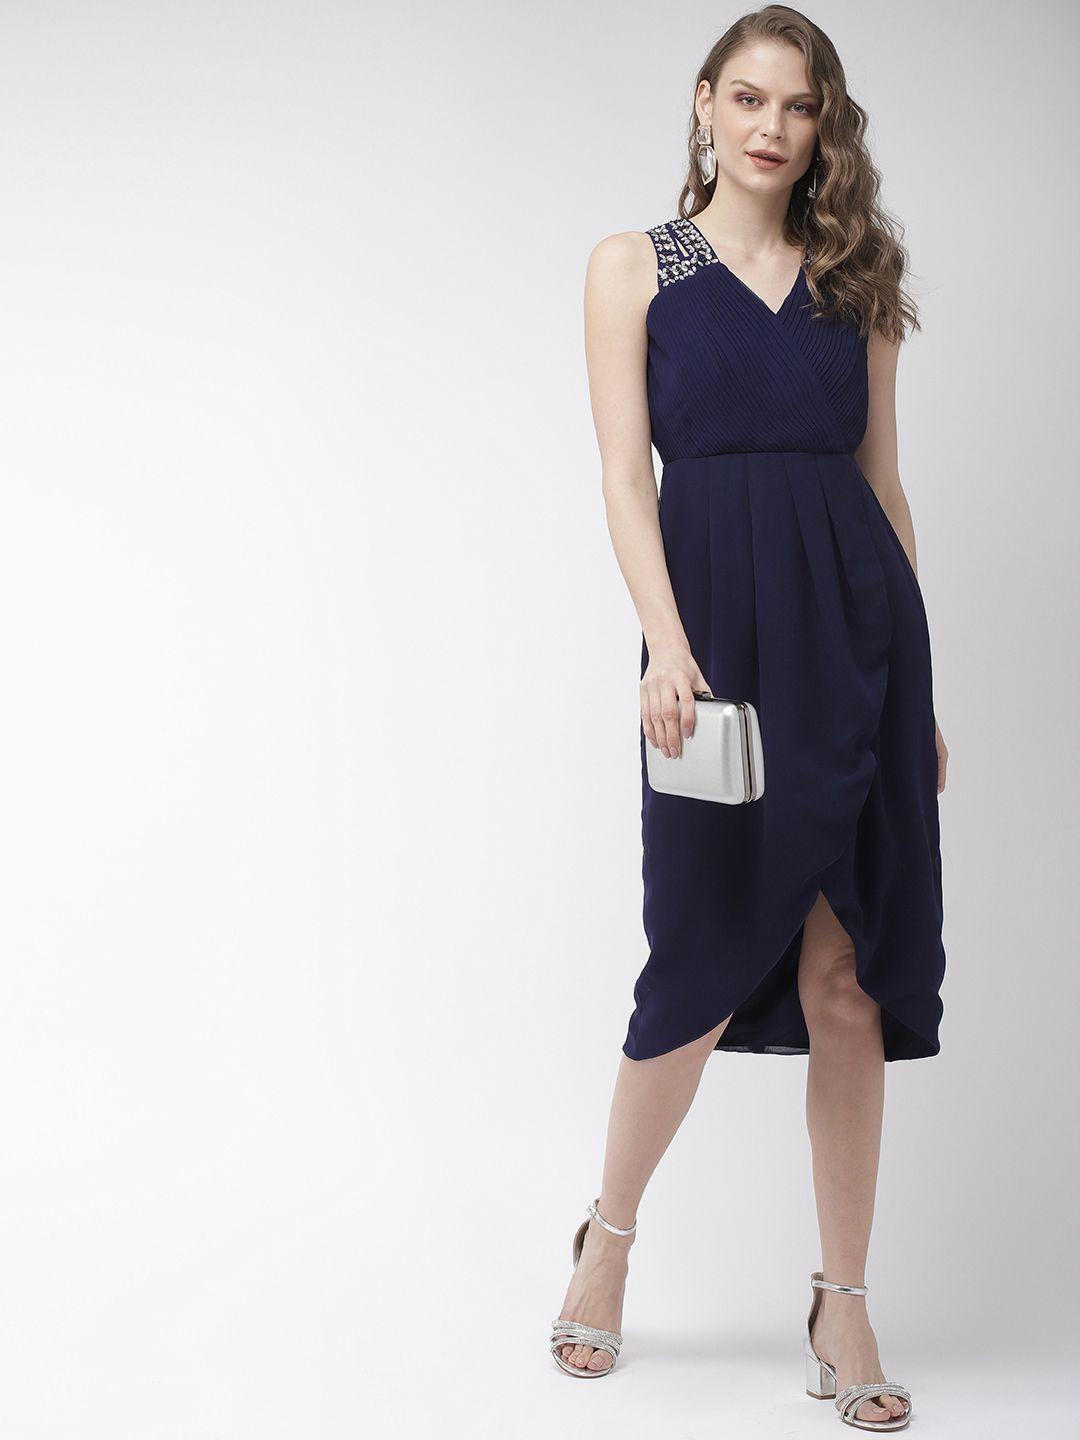 mish navy blue accordion pleated wrap party dress